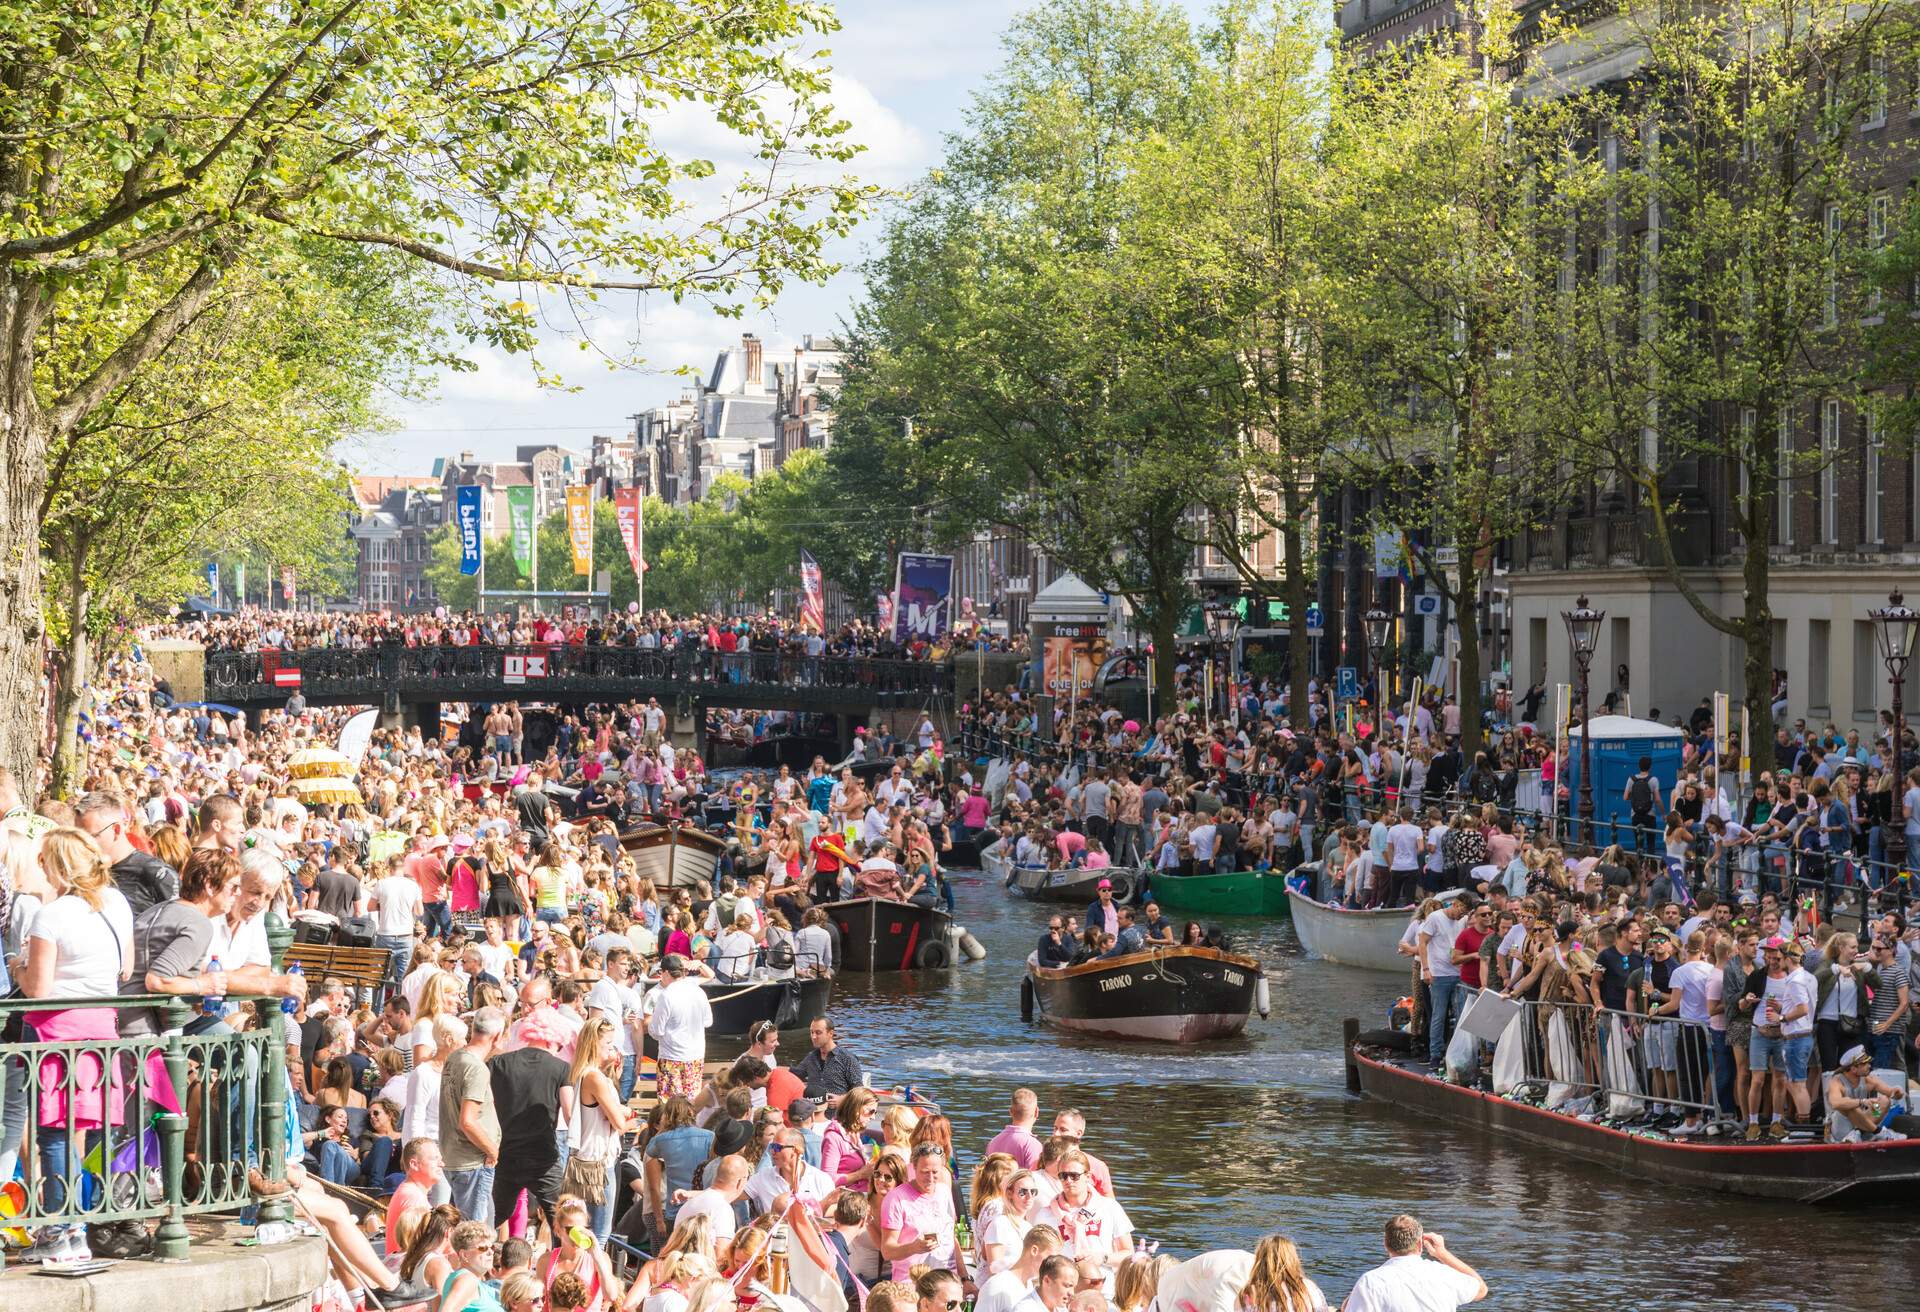 Amsterdam, August 05, 2017: Each year, in early August the gay pride parade takes place in the canal of Amsterdam. It is a large celebration for the rights of gay people. The canals are full of boats and a party mood can be felt in the whole town.